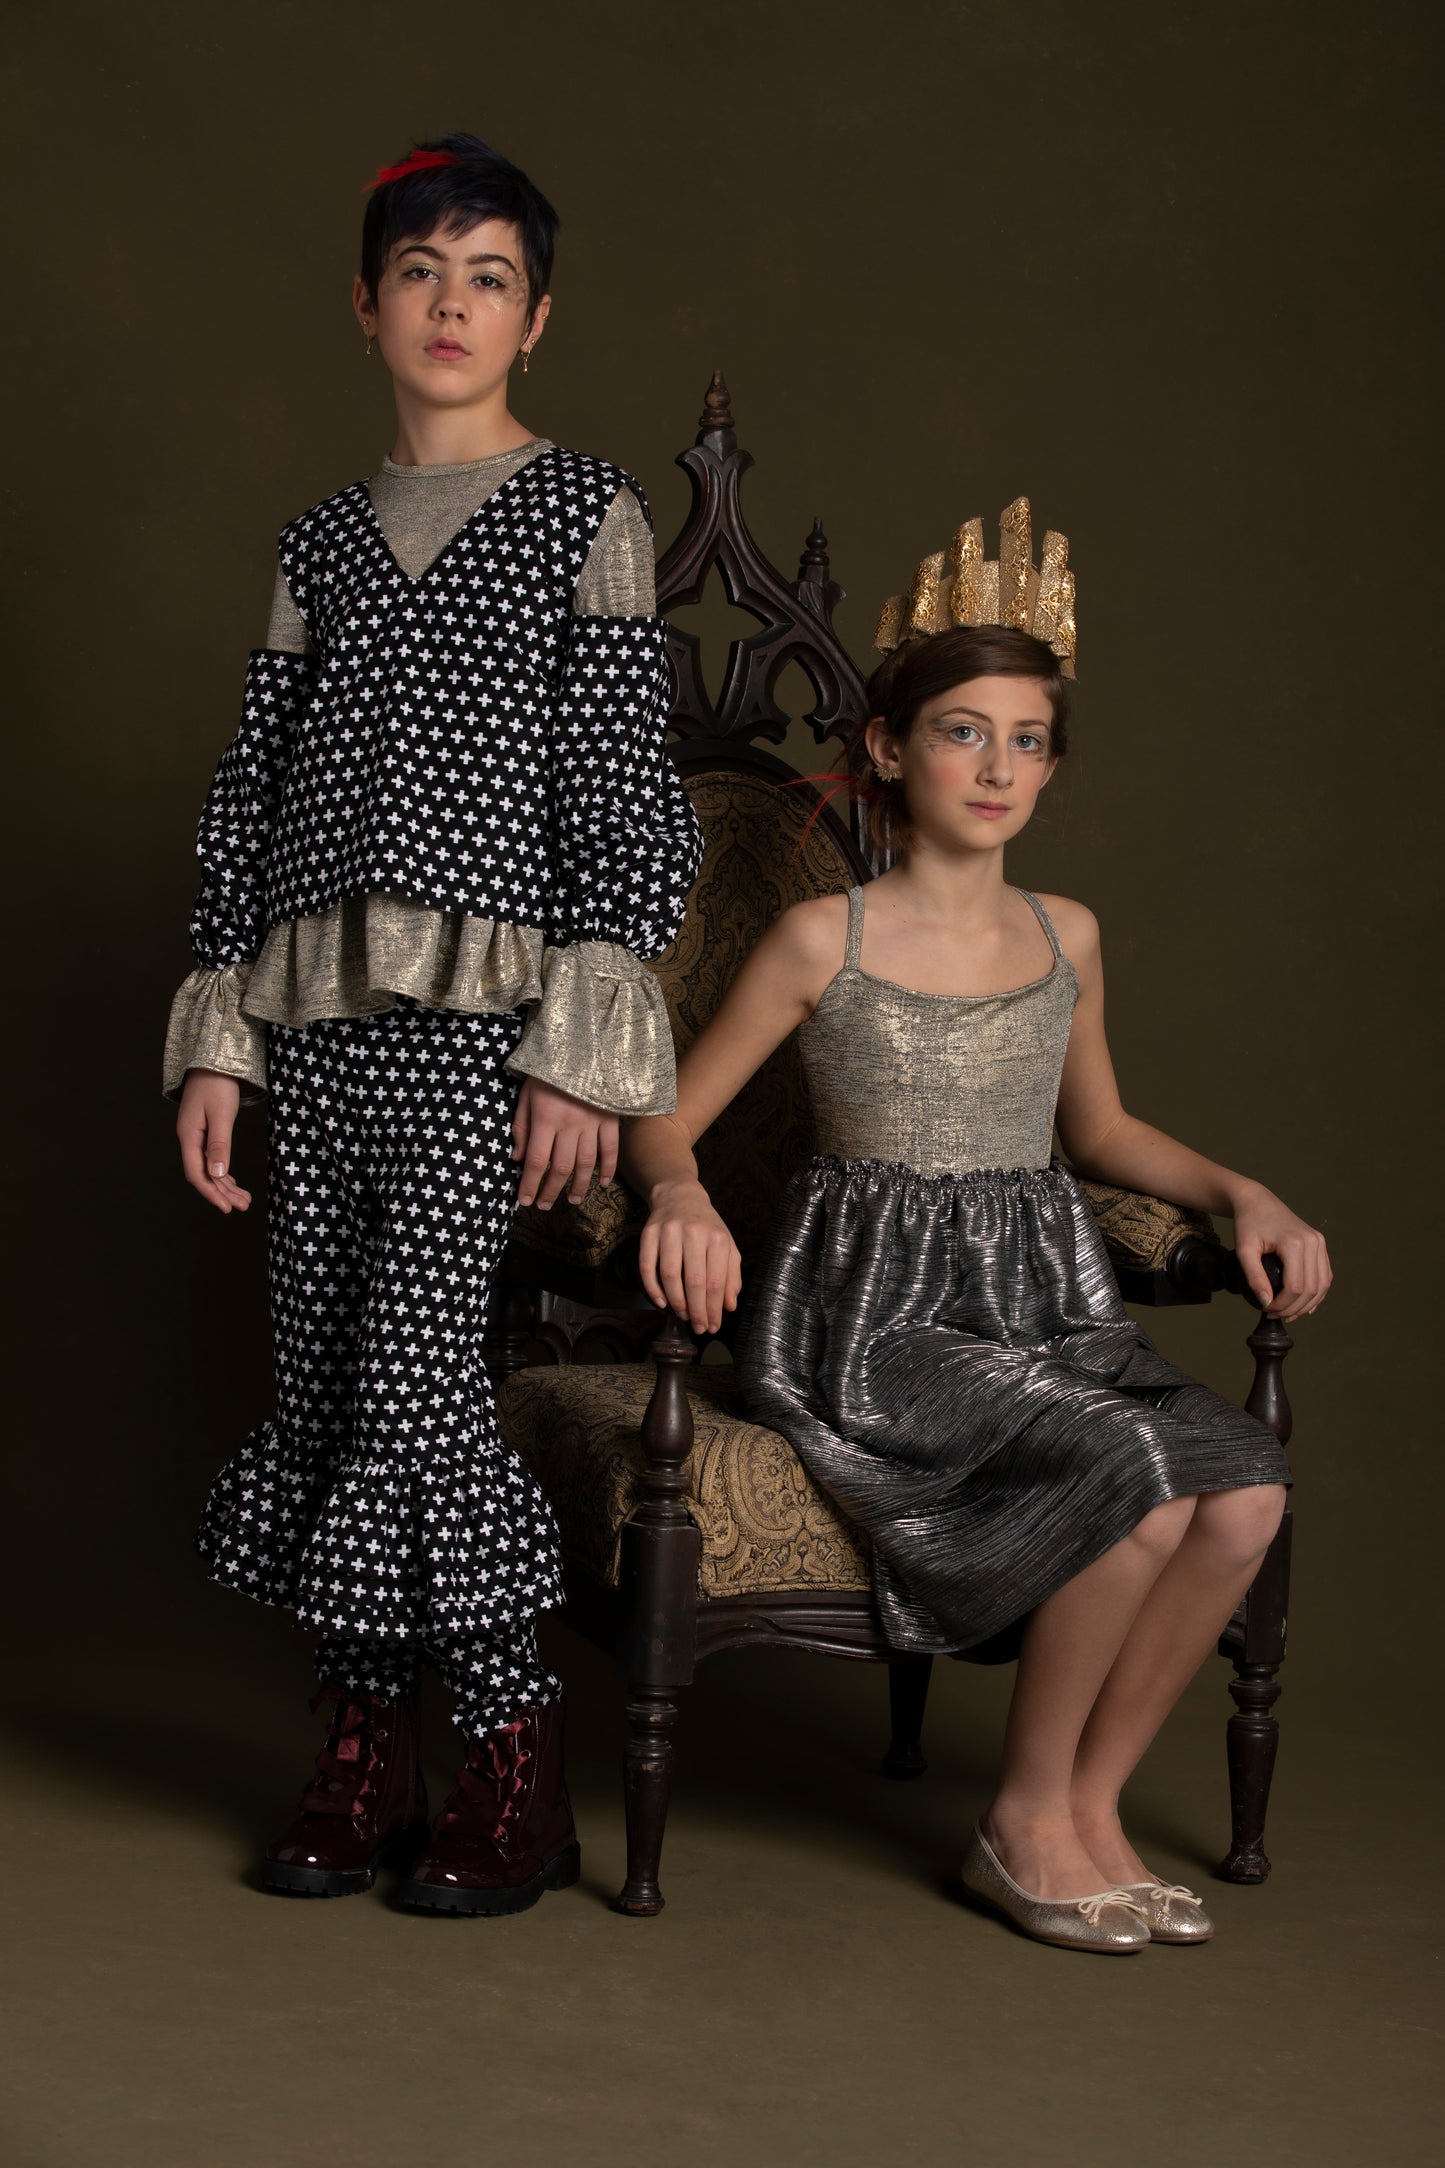 Child wearing the plus print off-shoulder top stands next to another child who sits in her throne